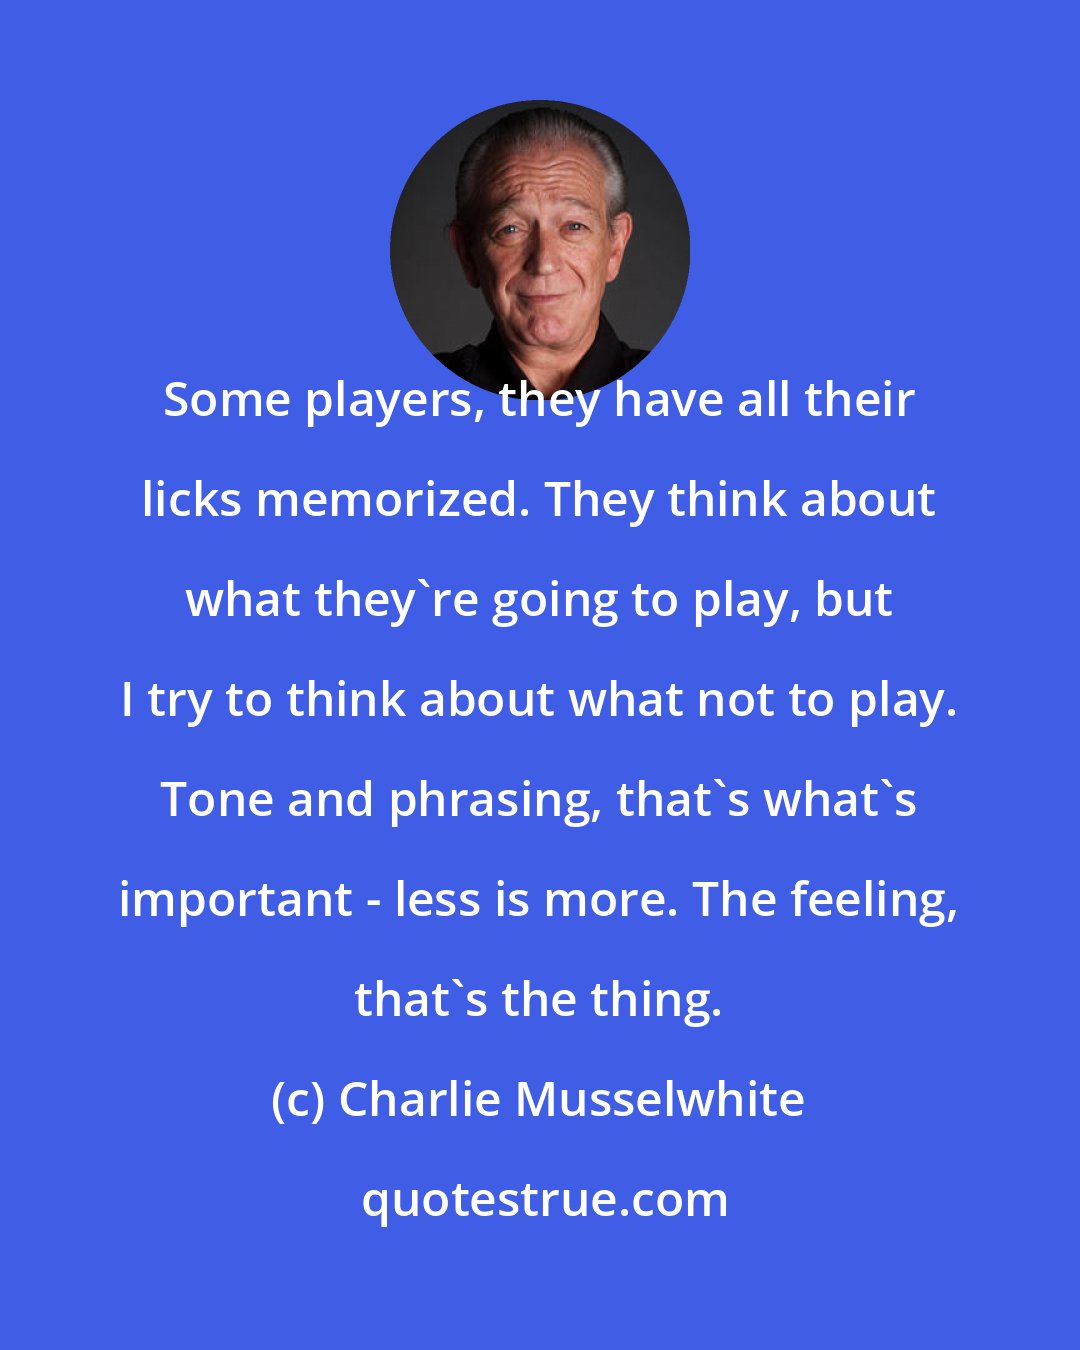 Charlie Musselwhite: Some players, they have all their licks memorized. They think about what they're going to play, but I try to think about what not to play. Tone and phrasing, that's what's important - less is more. The feeling, that's the thing.